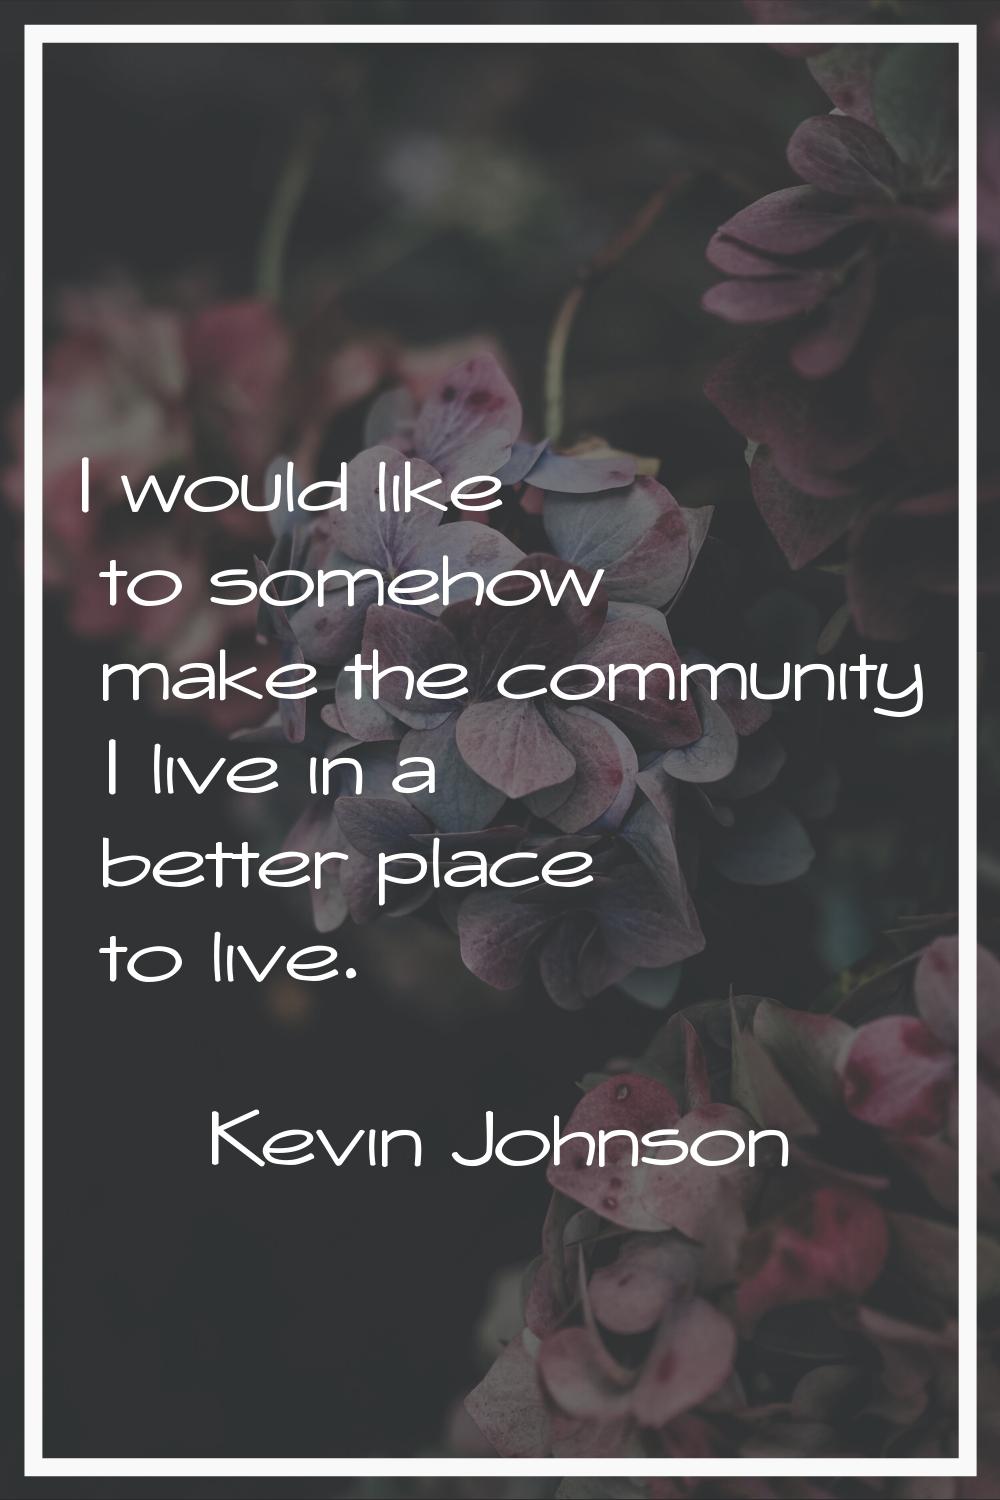 I would like to somehow make the community I live in a better place to live.